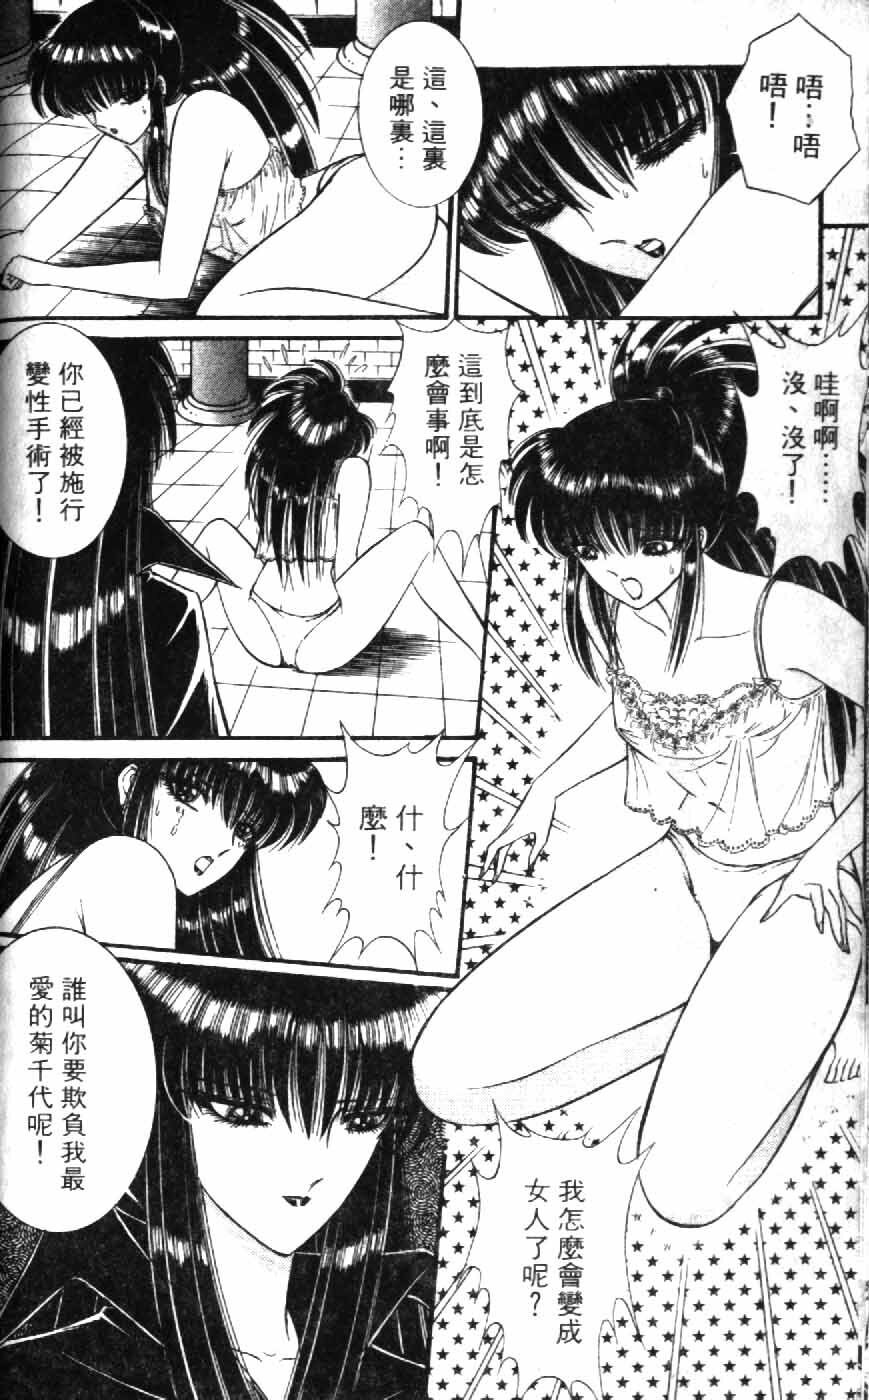 [Senno Knife] Ouma ga Horror Show 1 - Trans Sexual Special Show 1 | 顫慄博覽會 1 [Chinese] page 44 full